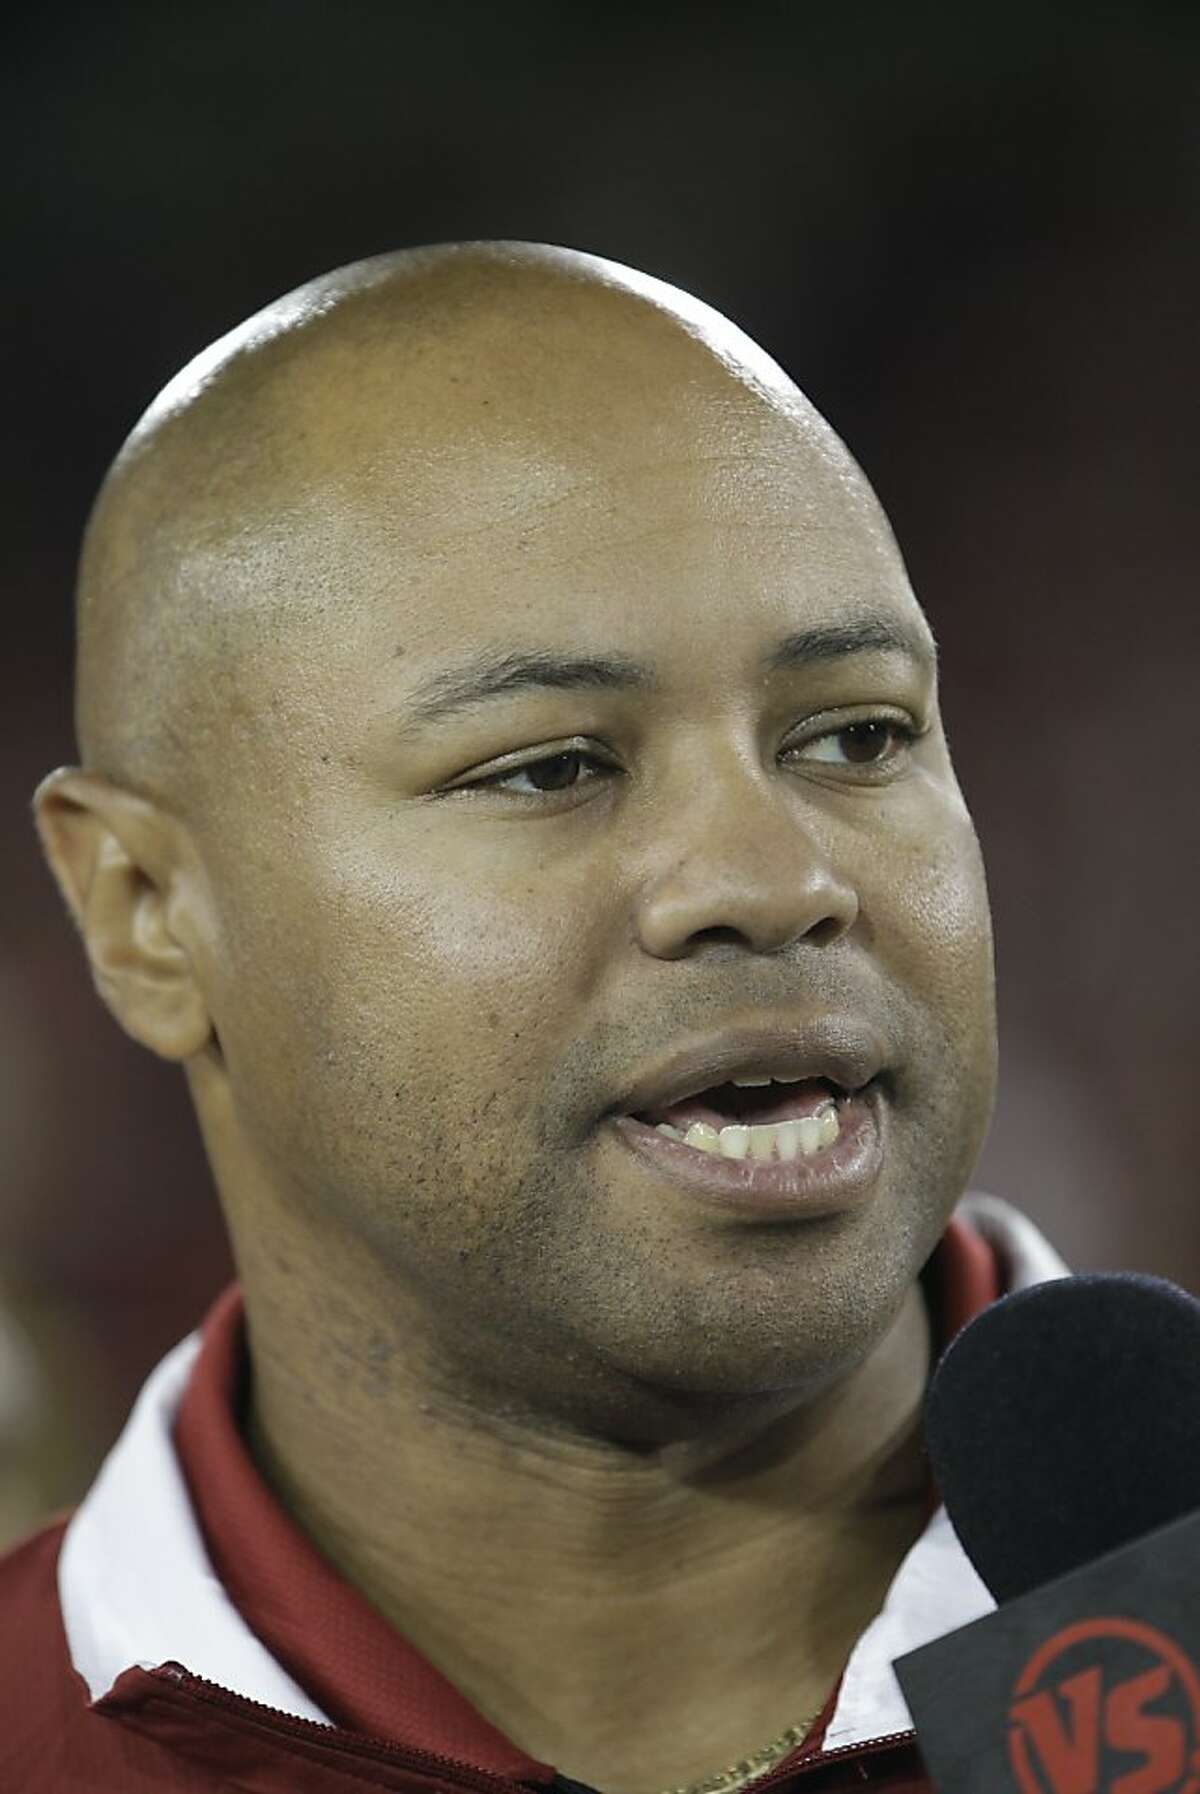 Stanford head coach David Shaw in the fourth quarter of an NCAA college football game in Stanford, Calif., Saturday, Oct. 8, 2011. (AP Photo/Paul Sakuma) Ran on: 10-22-2011 David Shaw warns that the Huskies are rolling since humbling losses to Stanford and Oregon in 2010. Ran on: 10-22-2011 David Shaw warns that the Huskies are rolling since humbling losses to Stanford and Oregon in 2010.